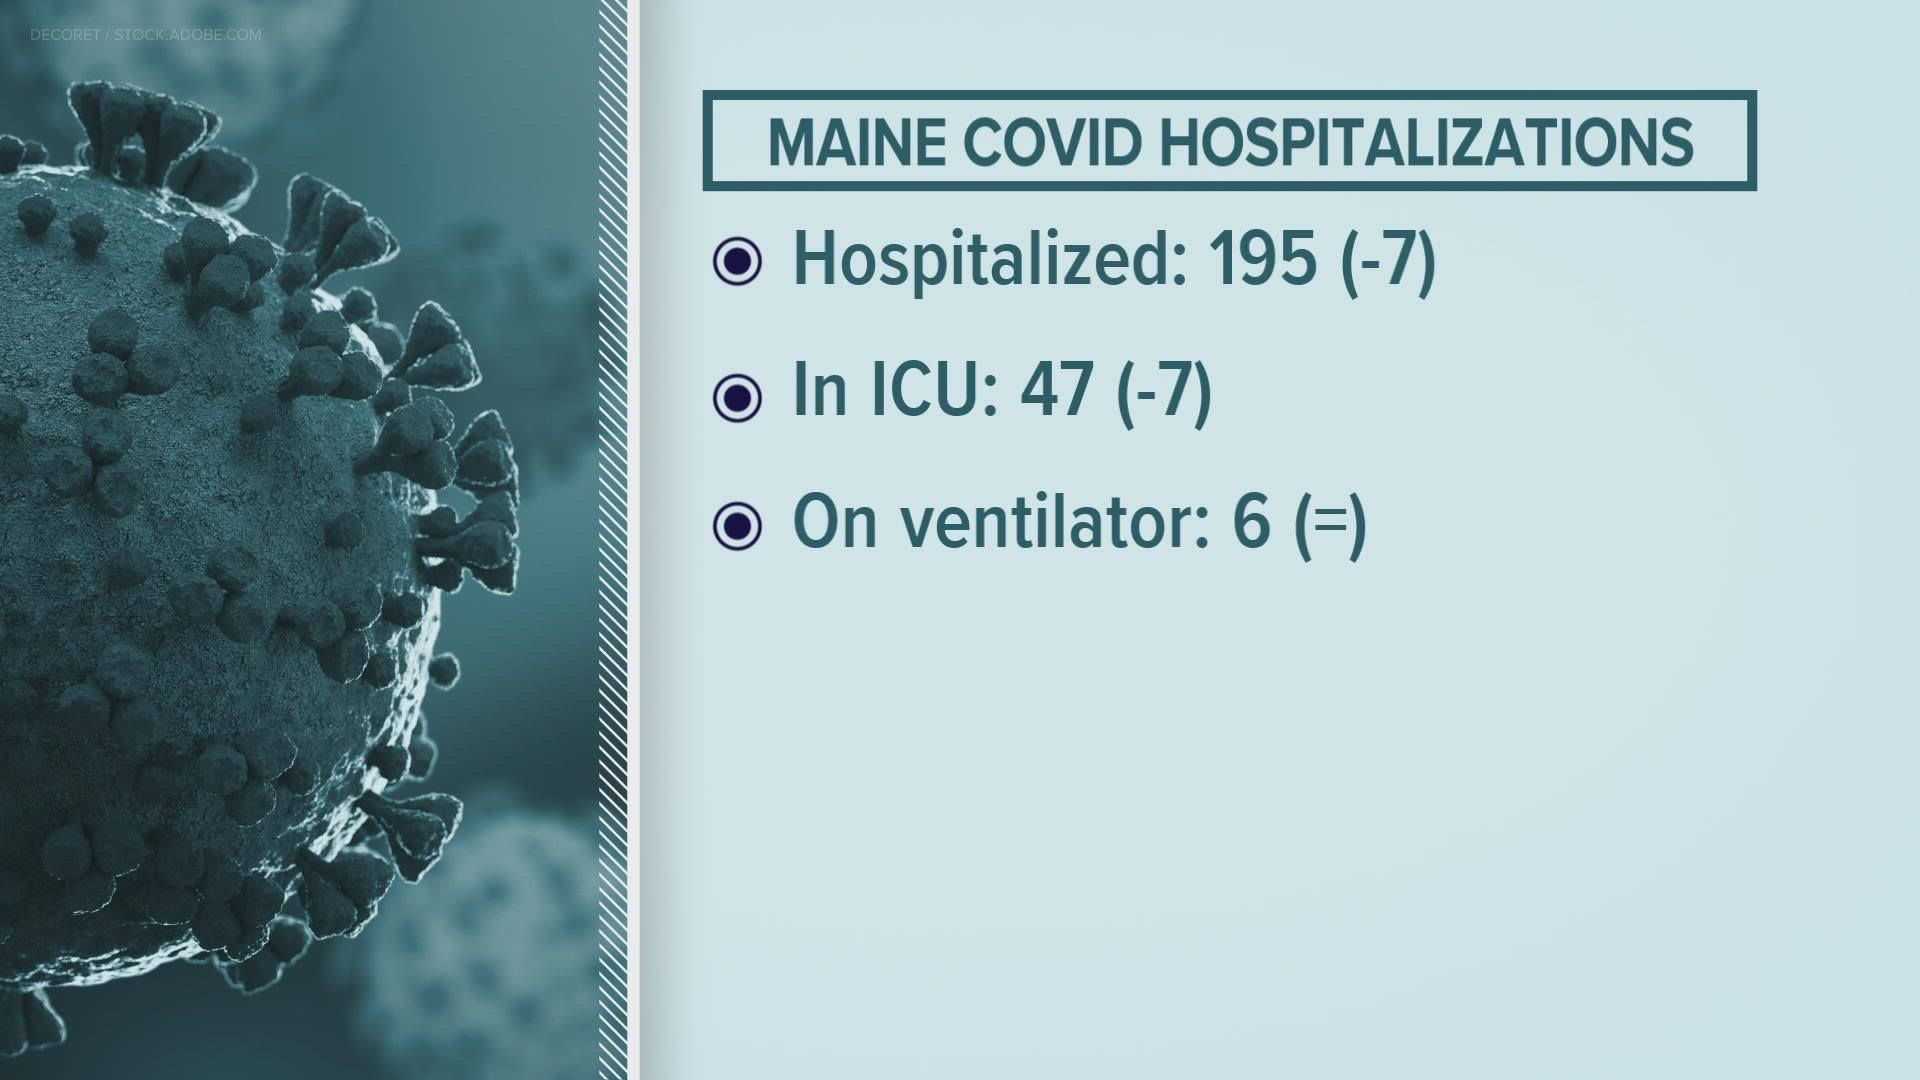 According to the Maine CDC, 195 people are currently hospitalized, with 47 people in the ICU, and six on ventilators.